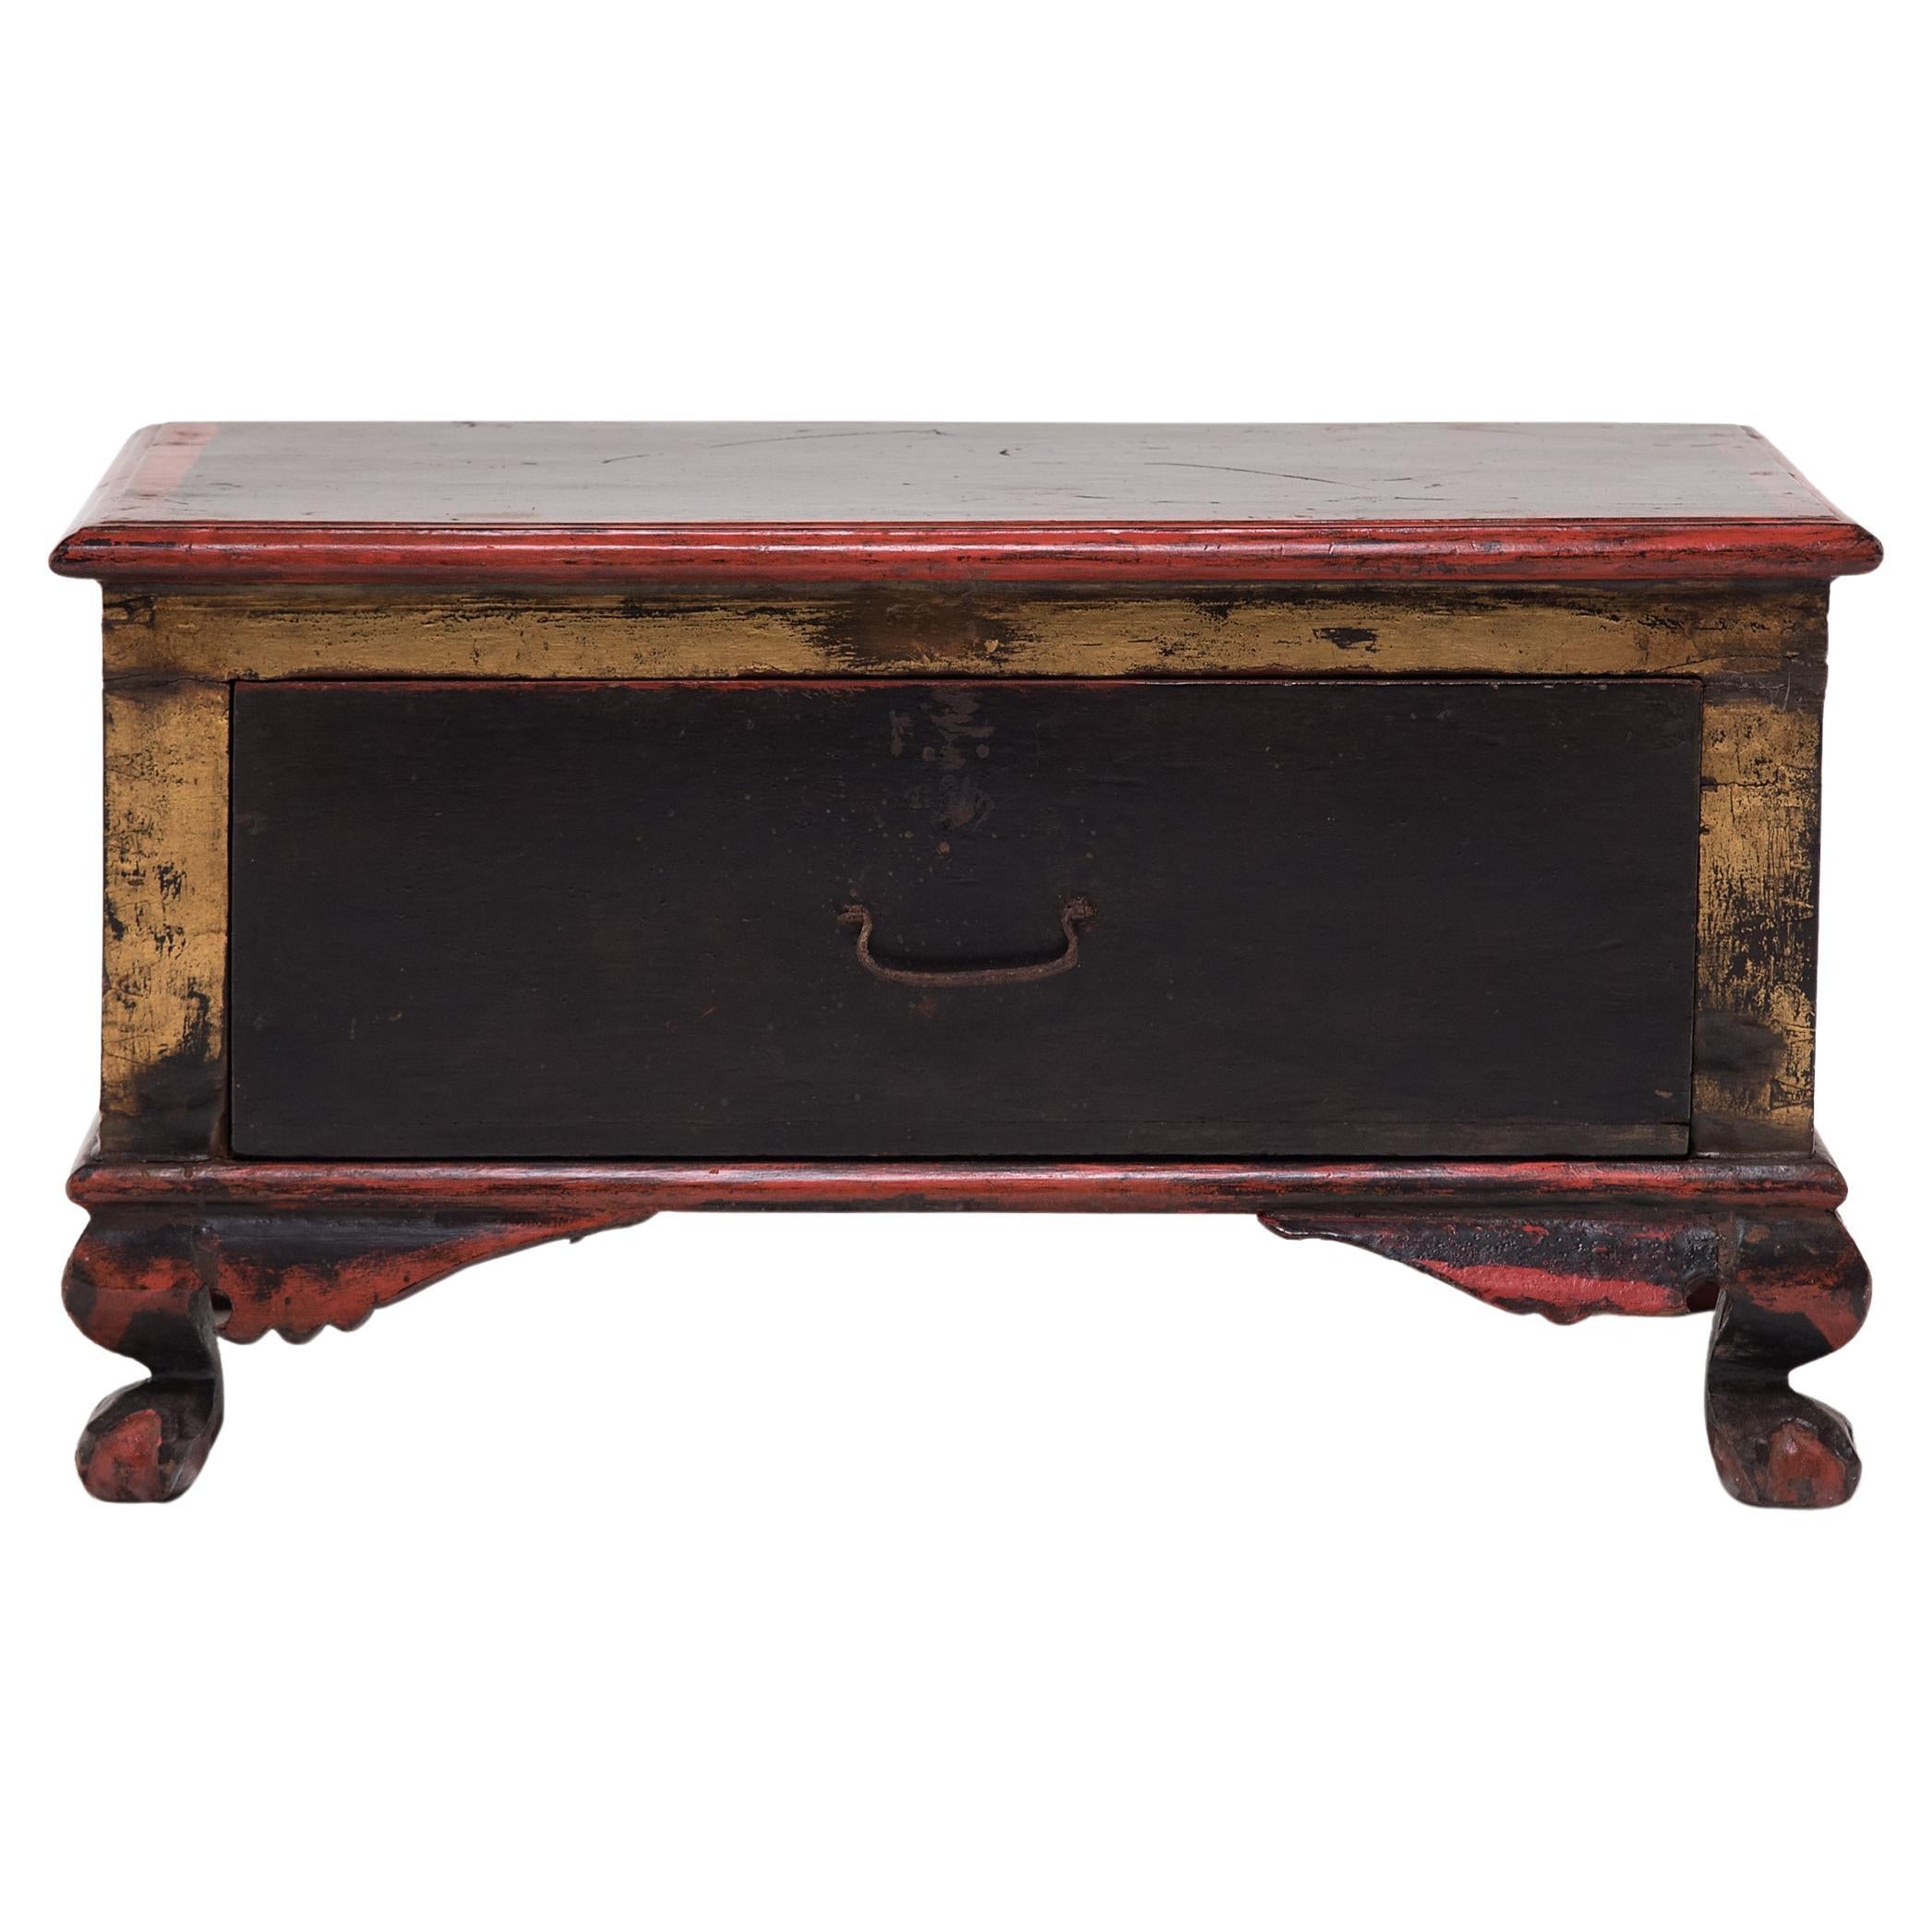 Chinese Red and Gold Shrine Chest, c. 1850